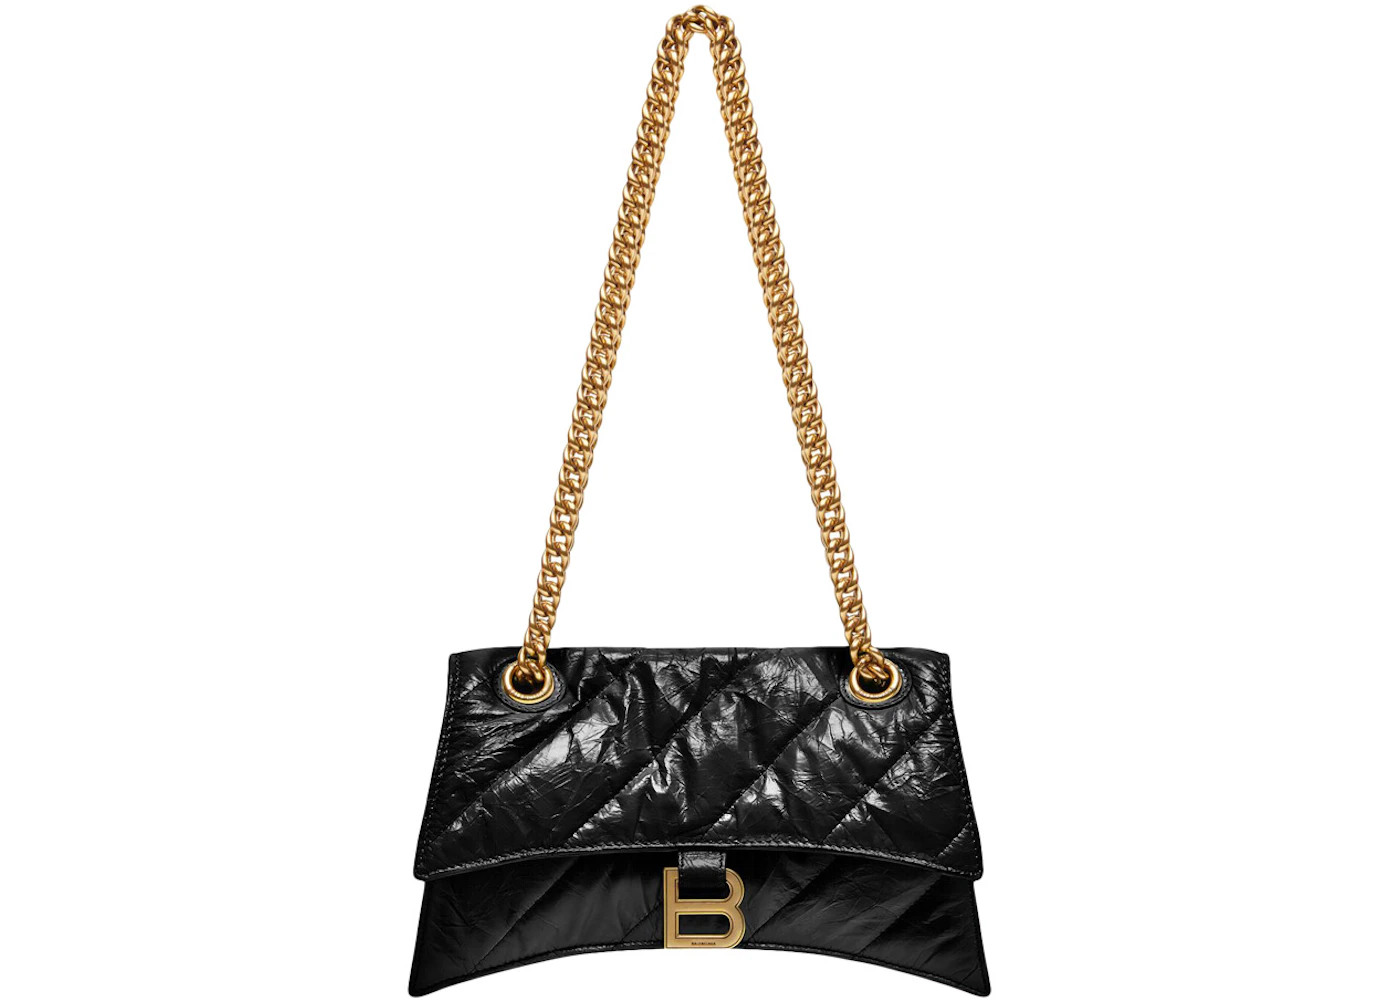 Balenciaga Women's Crush Small Chain Bag Quilted Black in Crushed ...